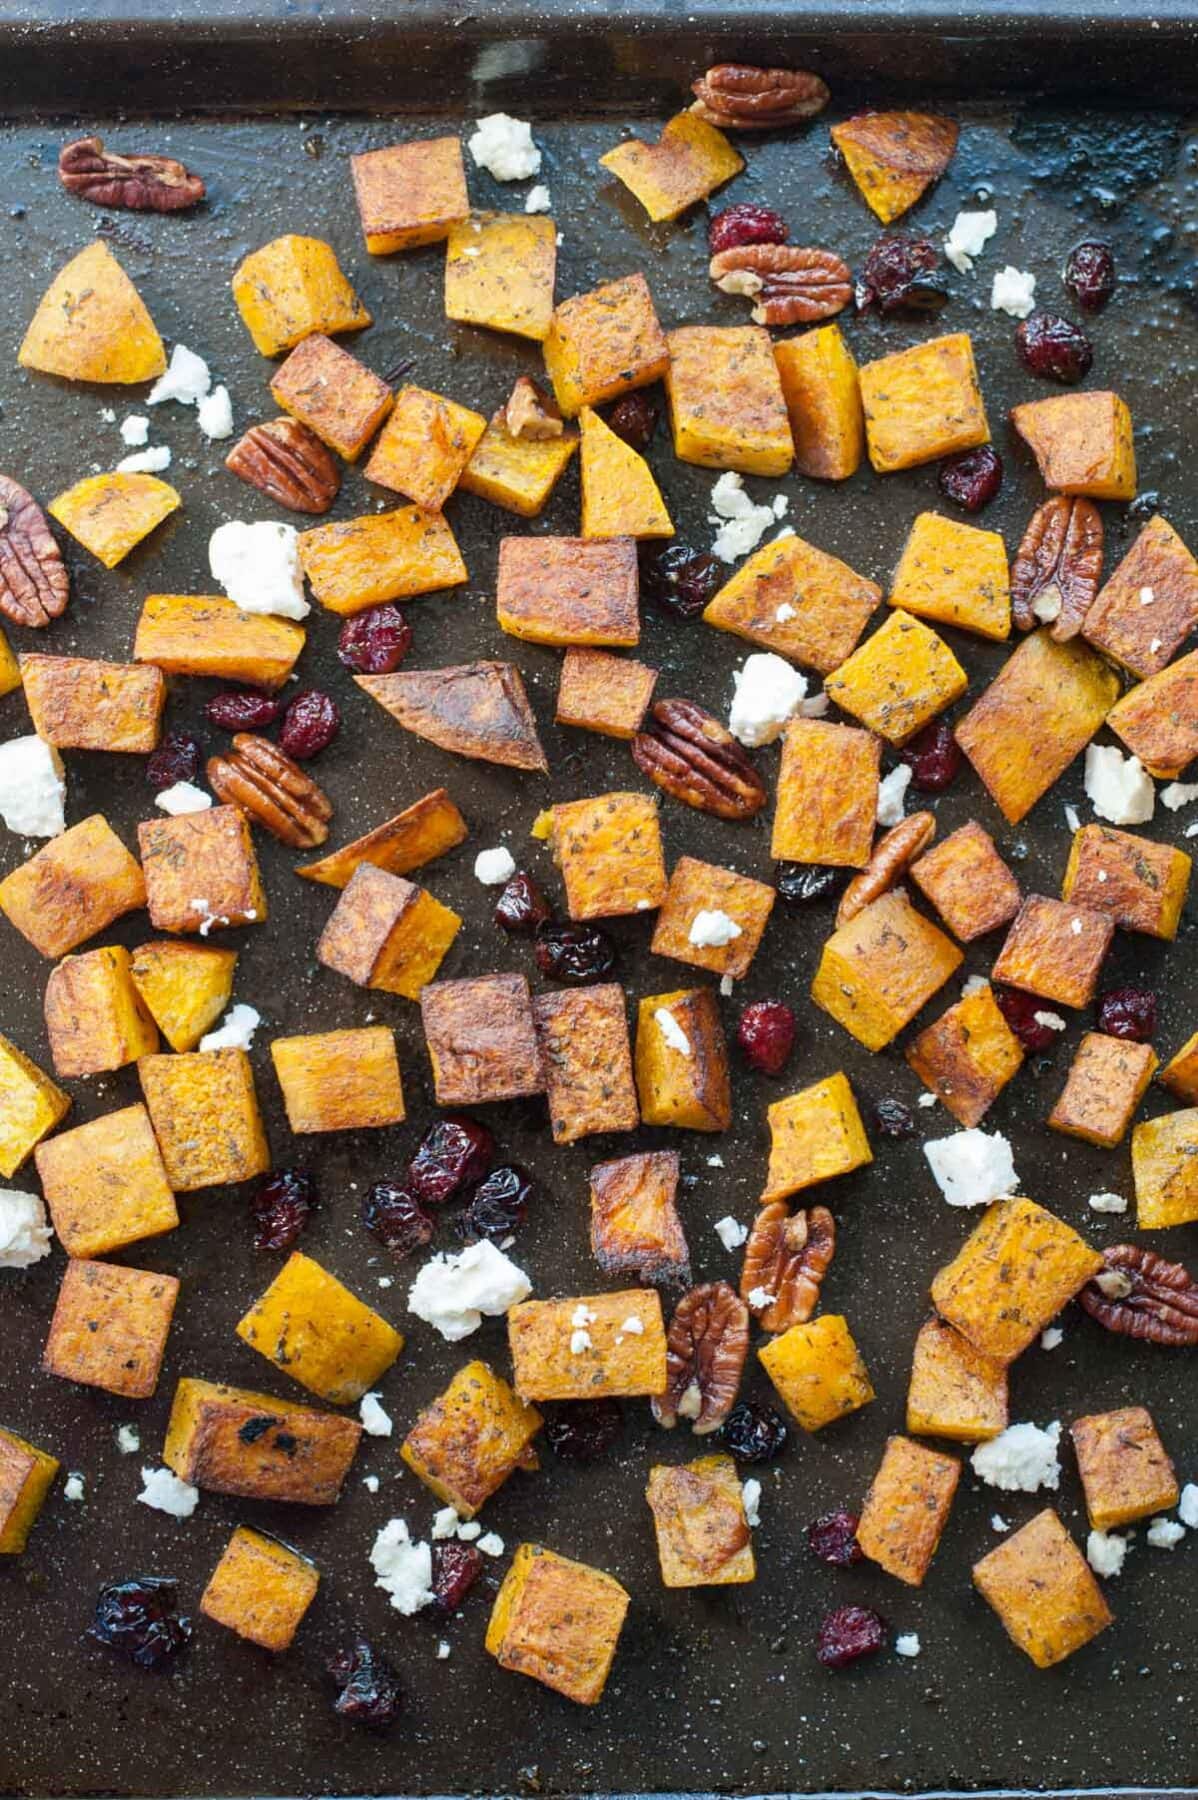 Roasted butternut squash with cranberries, rosemary, pecans, and feta on a black baking tray